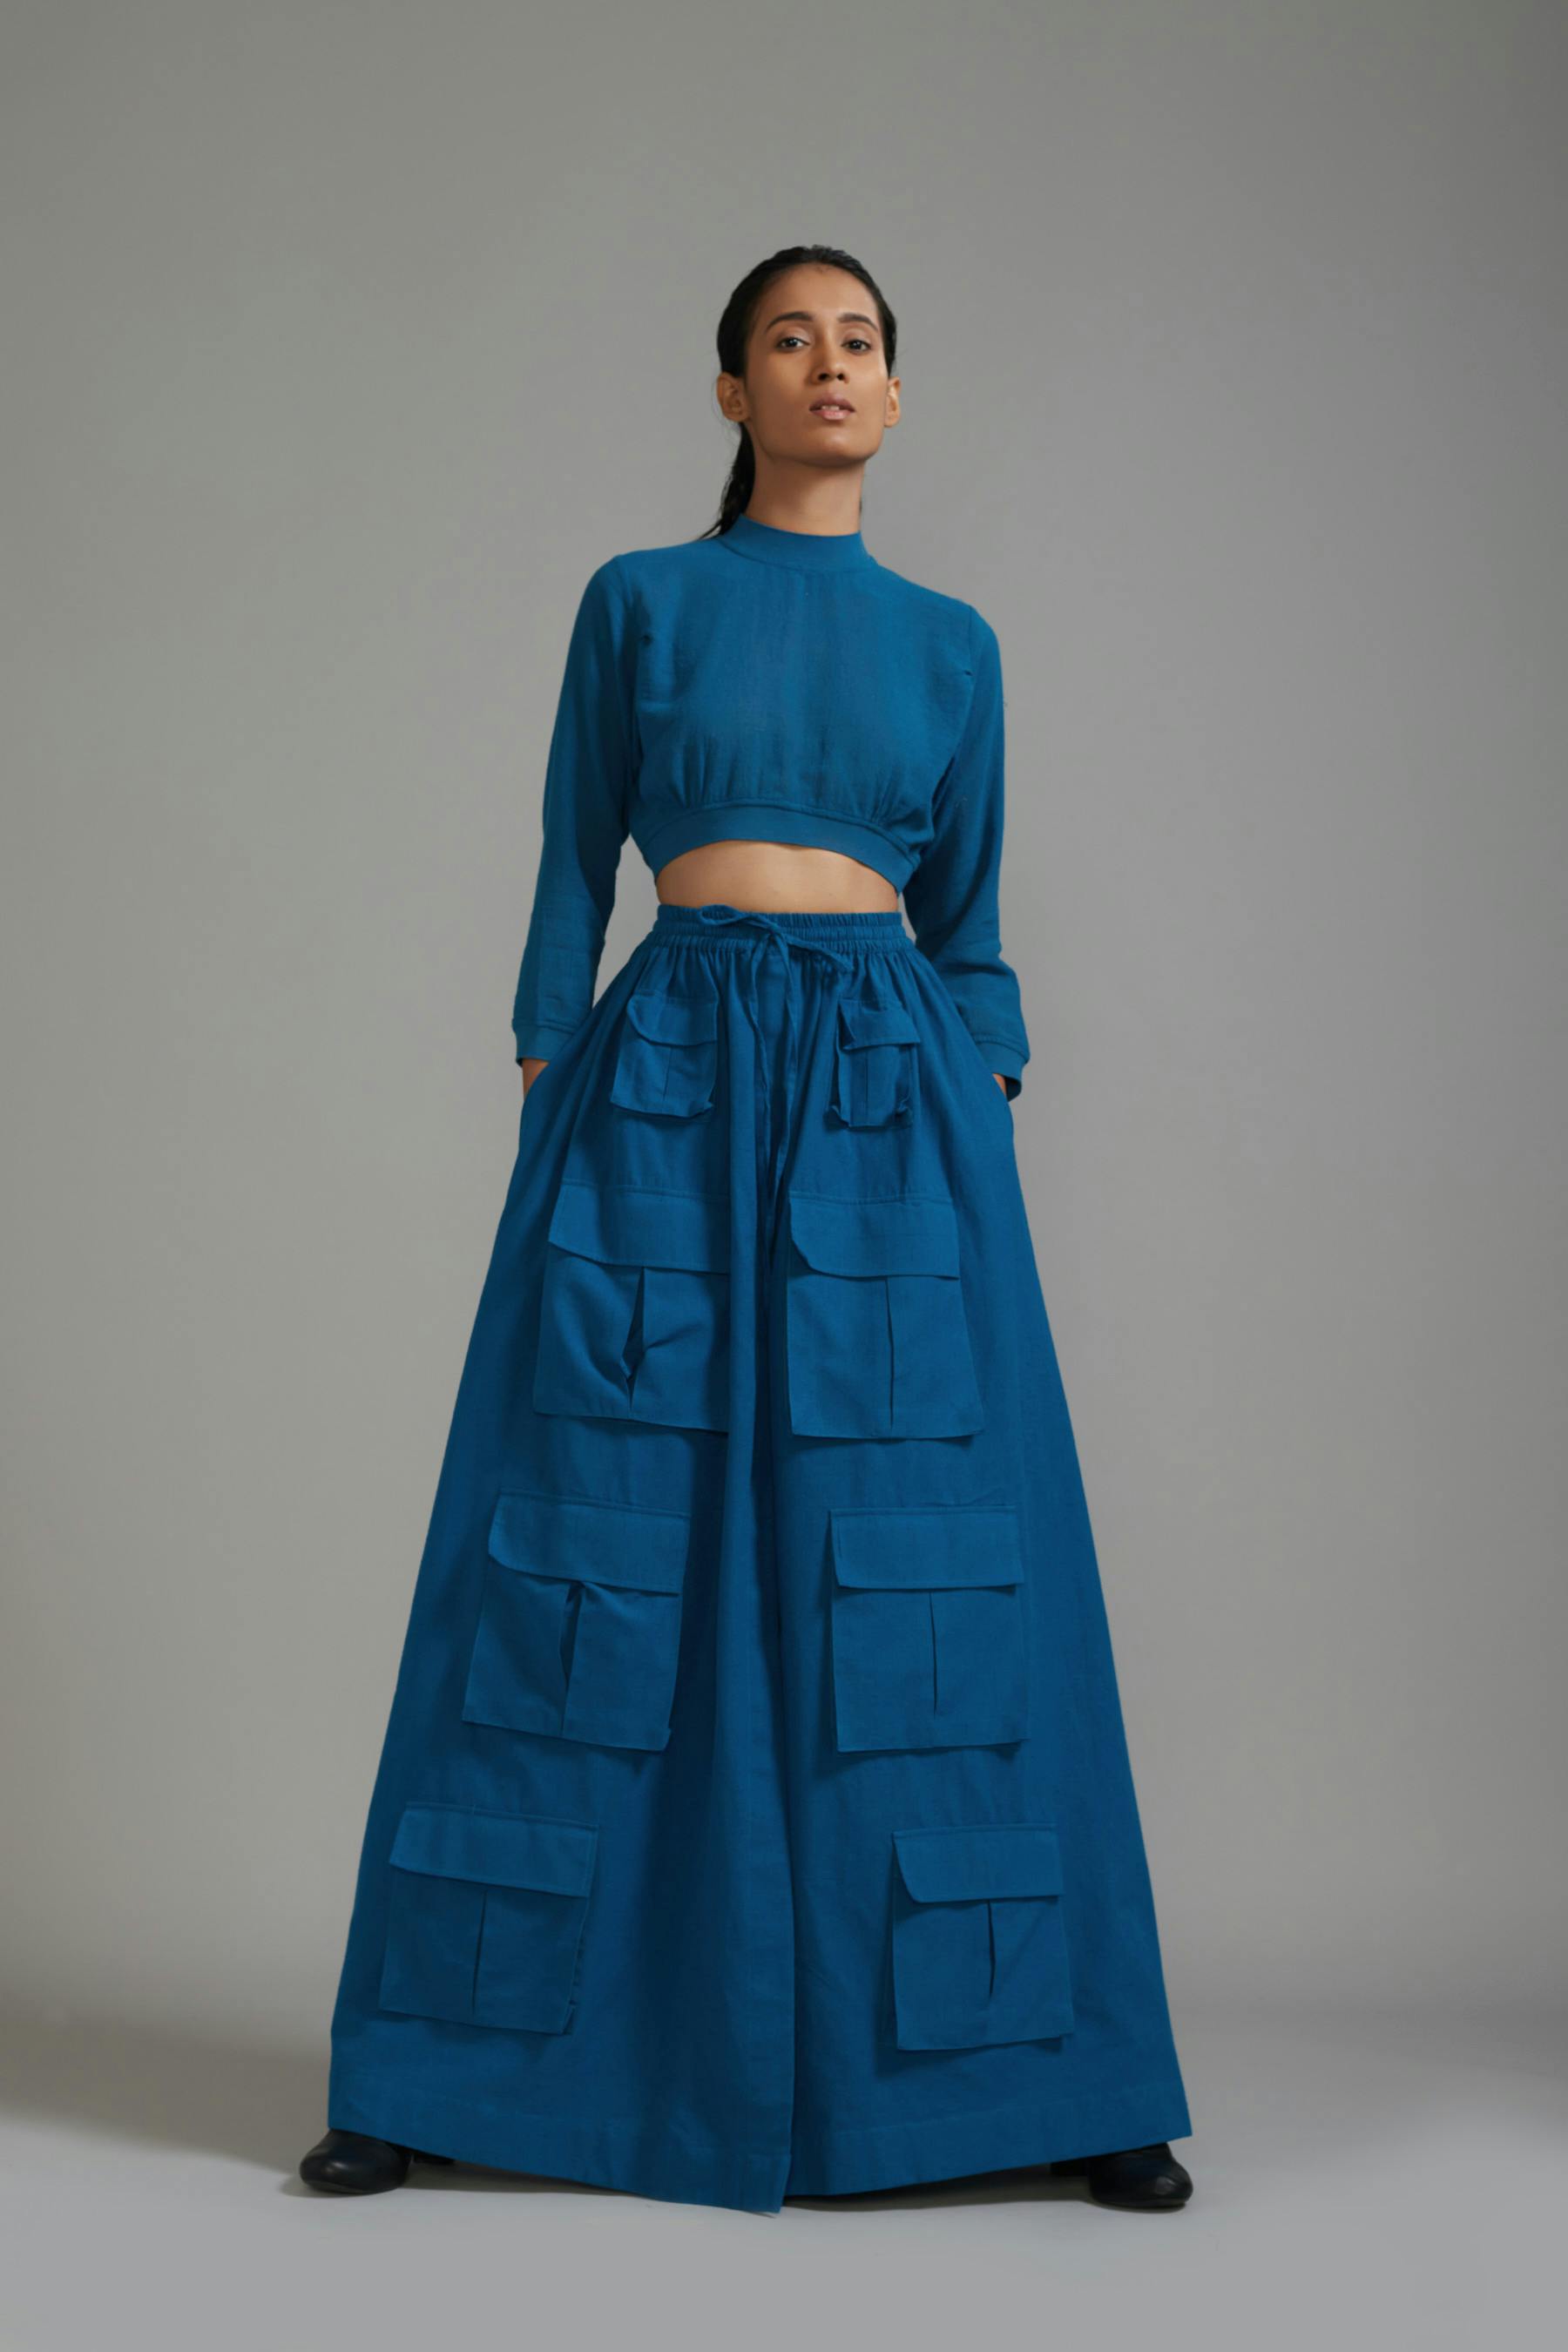 Blue Cargo Skirt, a product by Style Mati